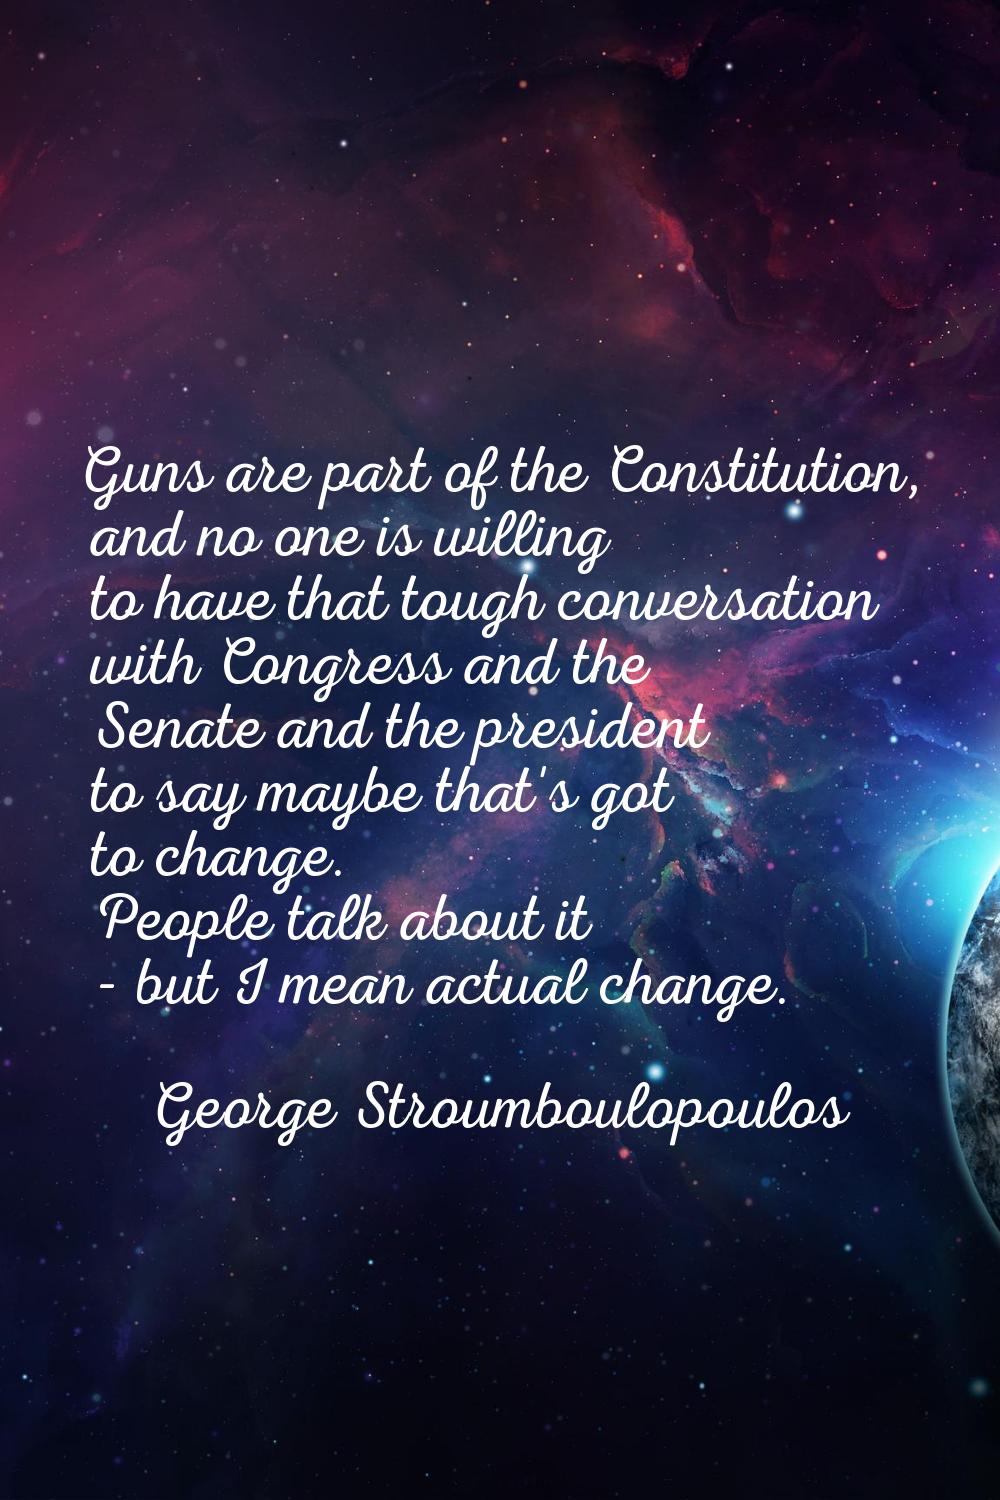 Guns are part of the Constitution, and no one is willing to have that tough conversation with Congr